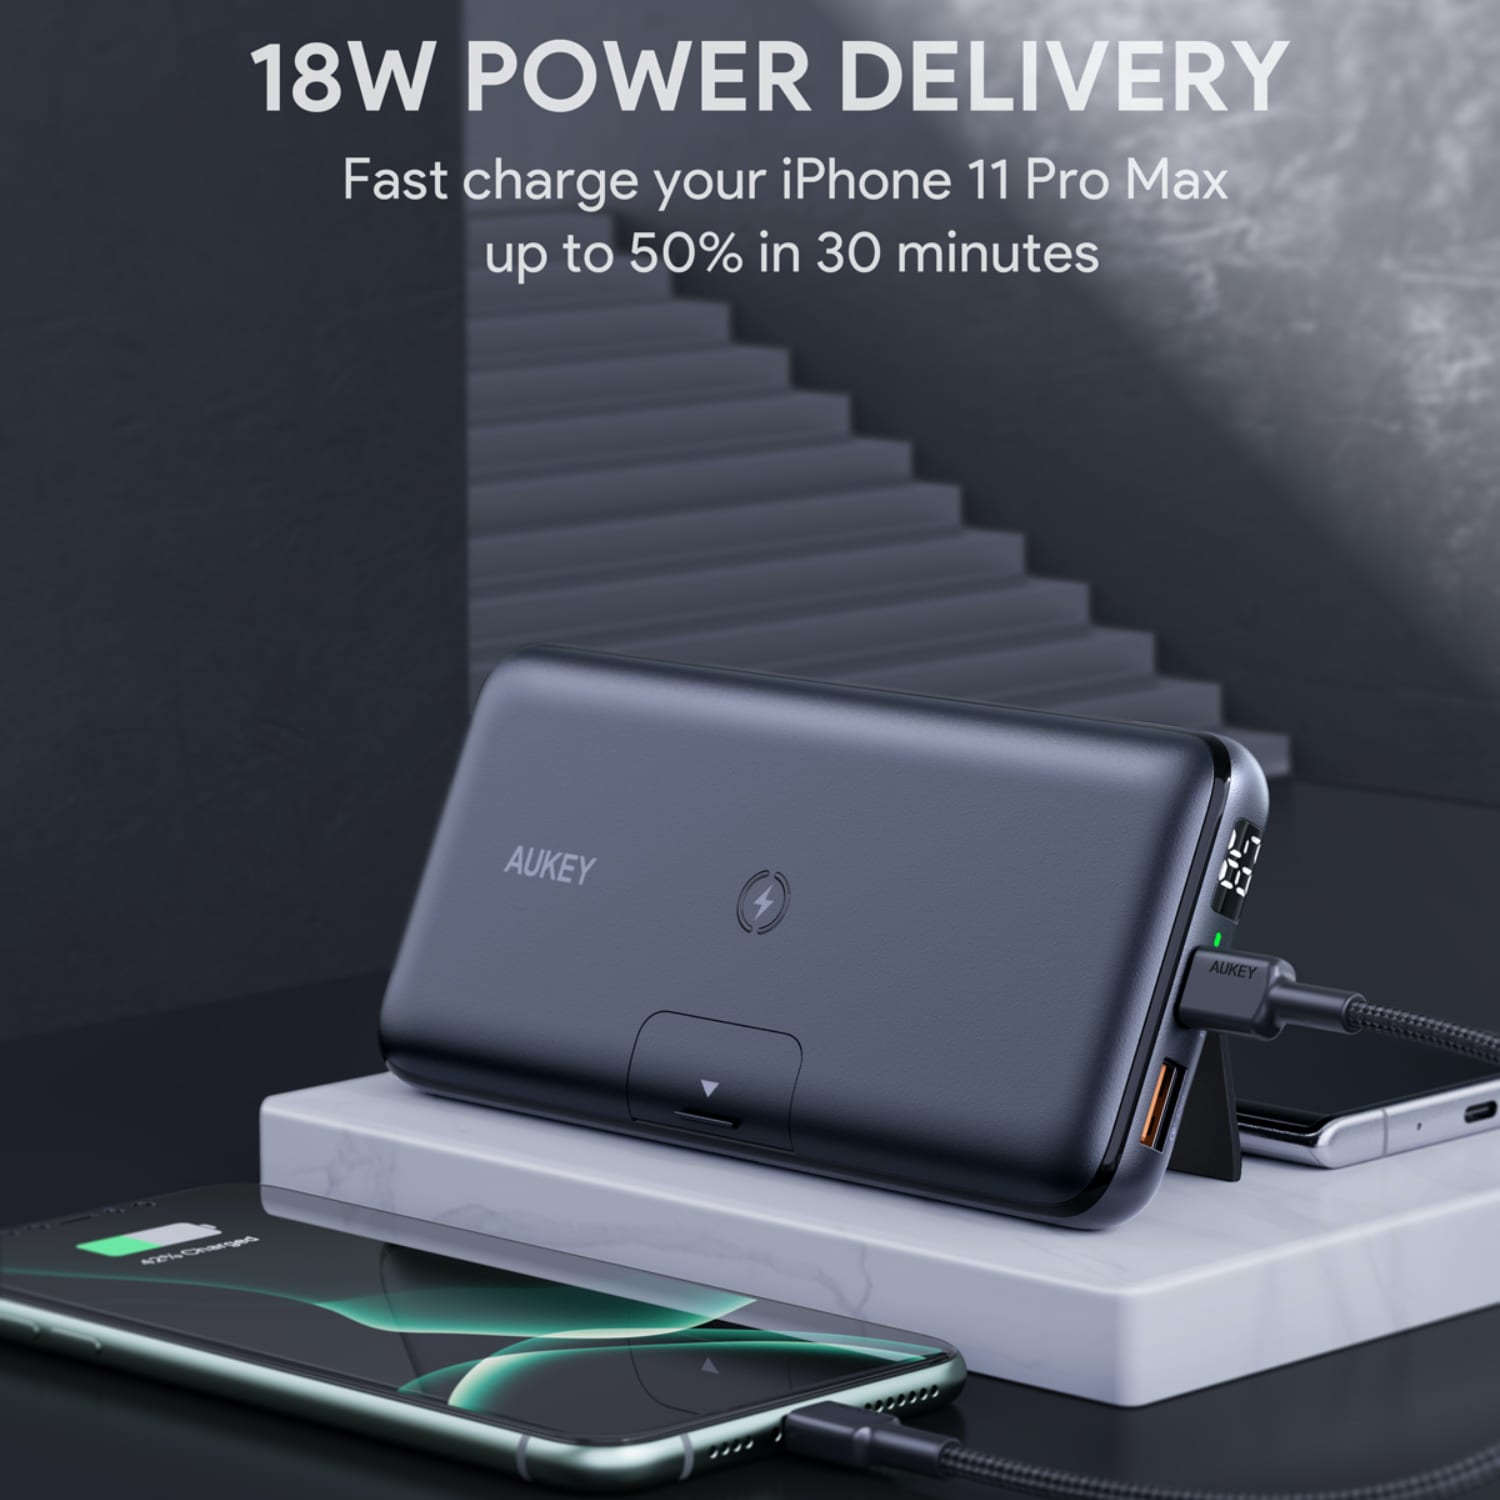 PB-WL03S 20W PD SCP QC 3.0 20000mAh Power Bank With Foldable Stand & 10W Wireless Charging